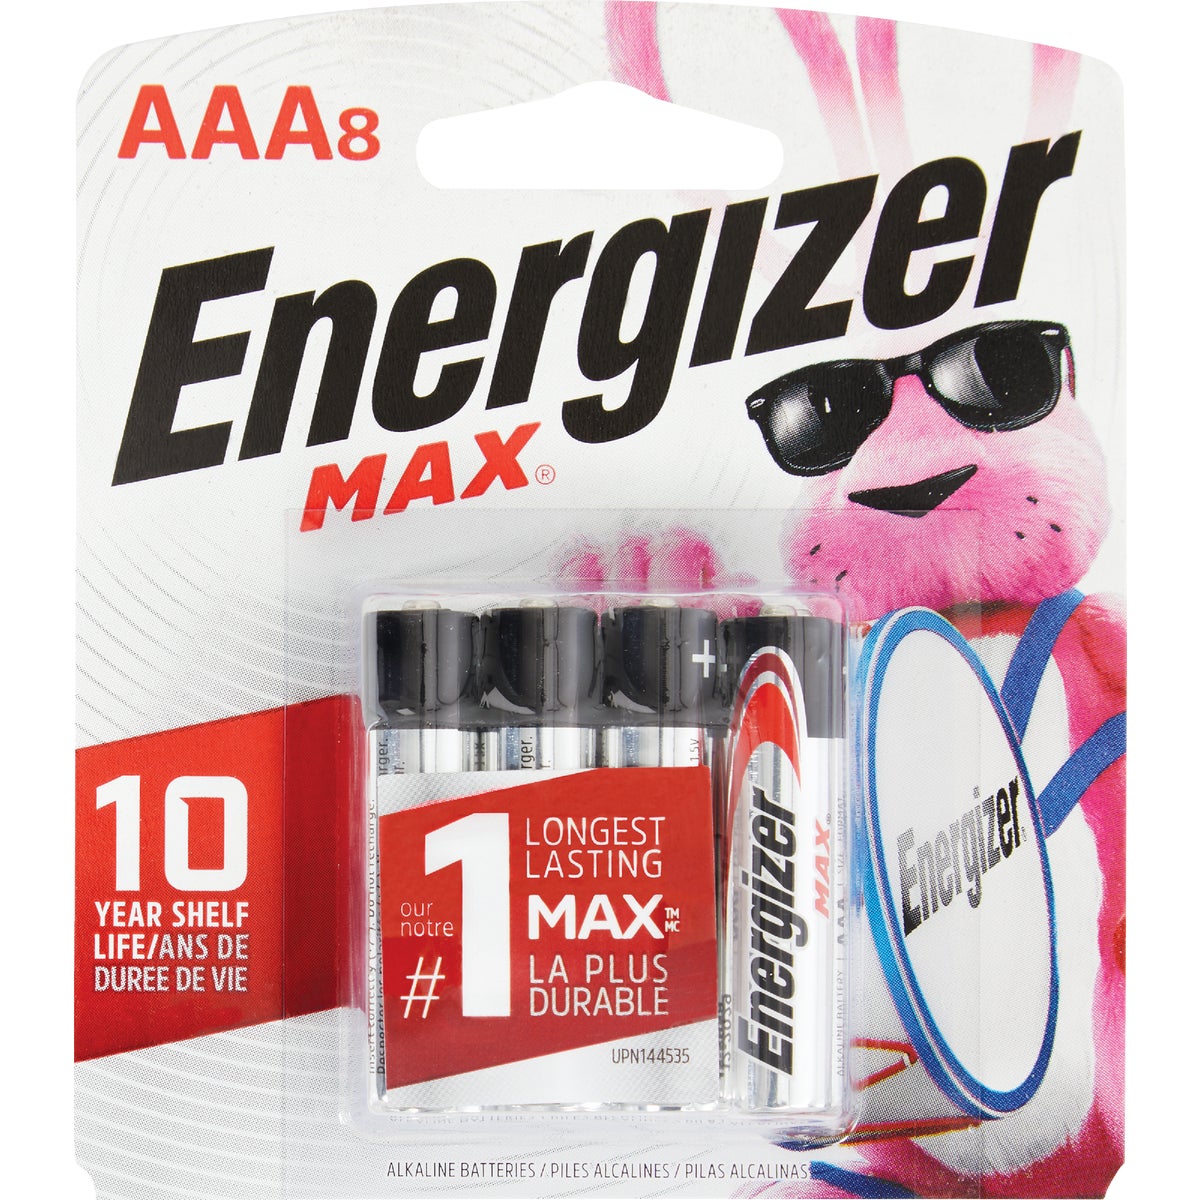 Energizer Max AAA Alkaline Battery (8-Pack)